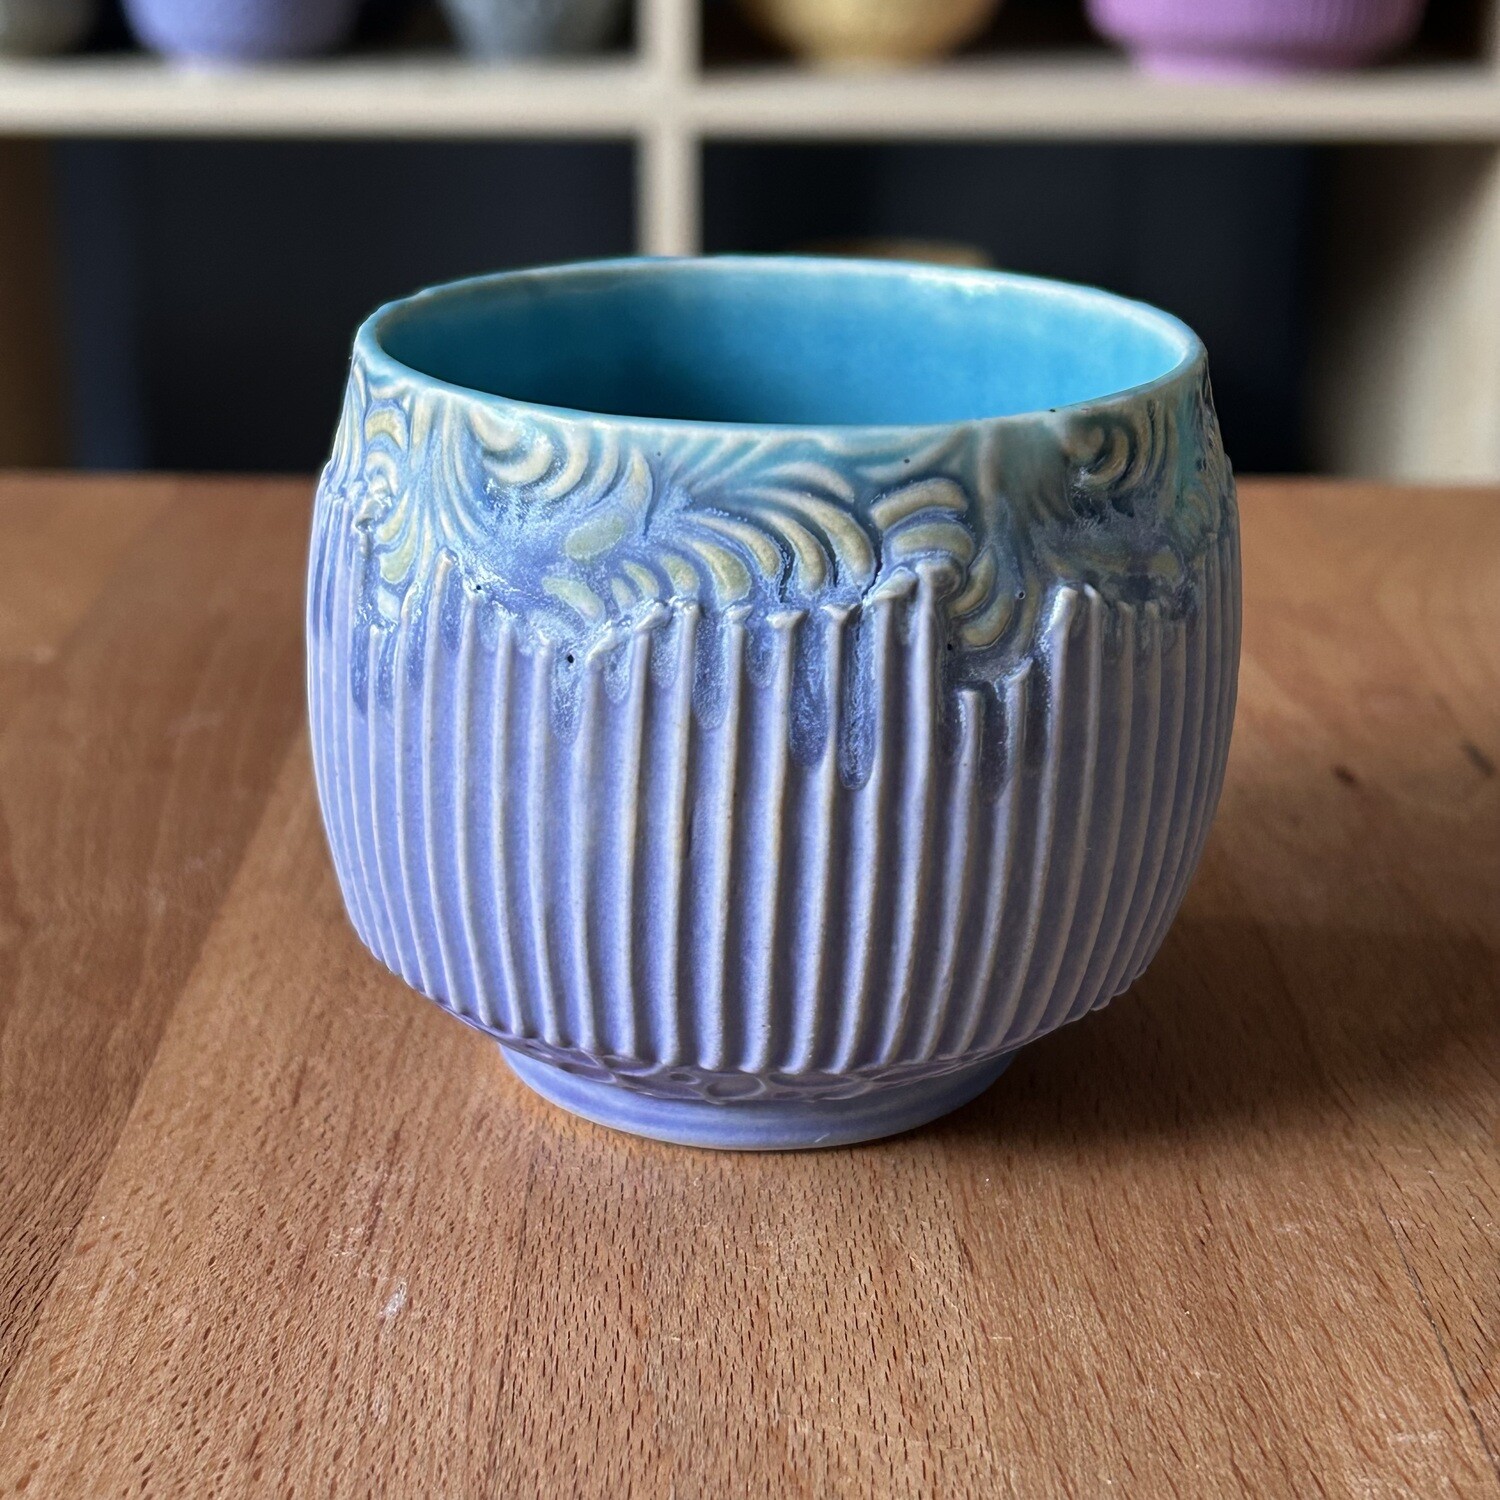 5oz Espresso Cup/Tiny Bowl in turquoise, watered mermaid &amp; purple